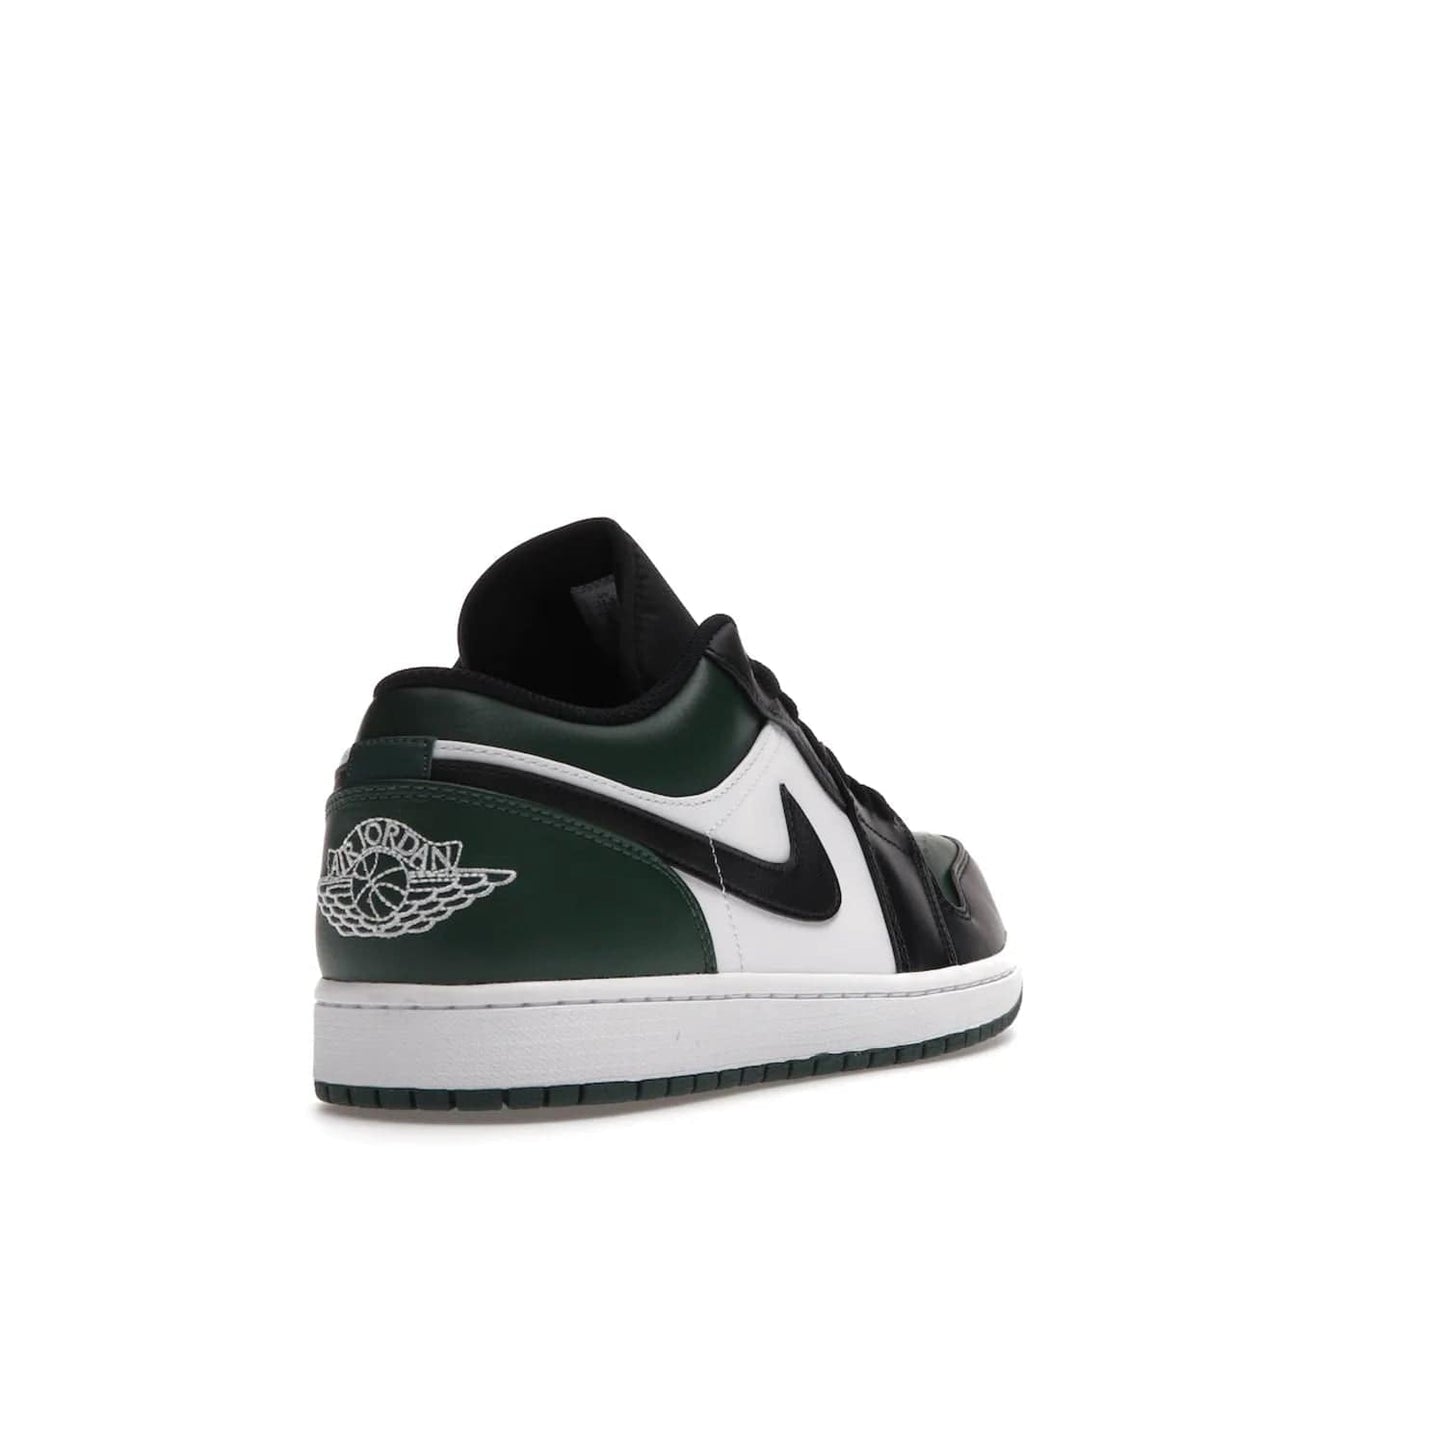 Jordan 1 Low Green Toe - Image 31 - Only at www.BallersClubKickz.com - The Jordan 1 Low Green Toe features white, black and Noble Green leather with black Swoosh. Get the classic Bred Toe-inspired color blocking with green perforated toe box. White and green Air sole completes the design. Released in October 2021 at only $100. Grab your pair now!